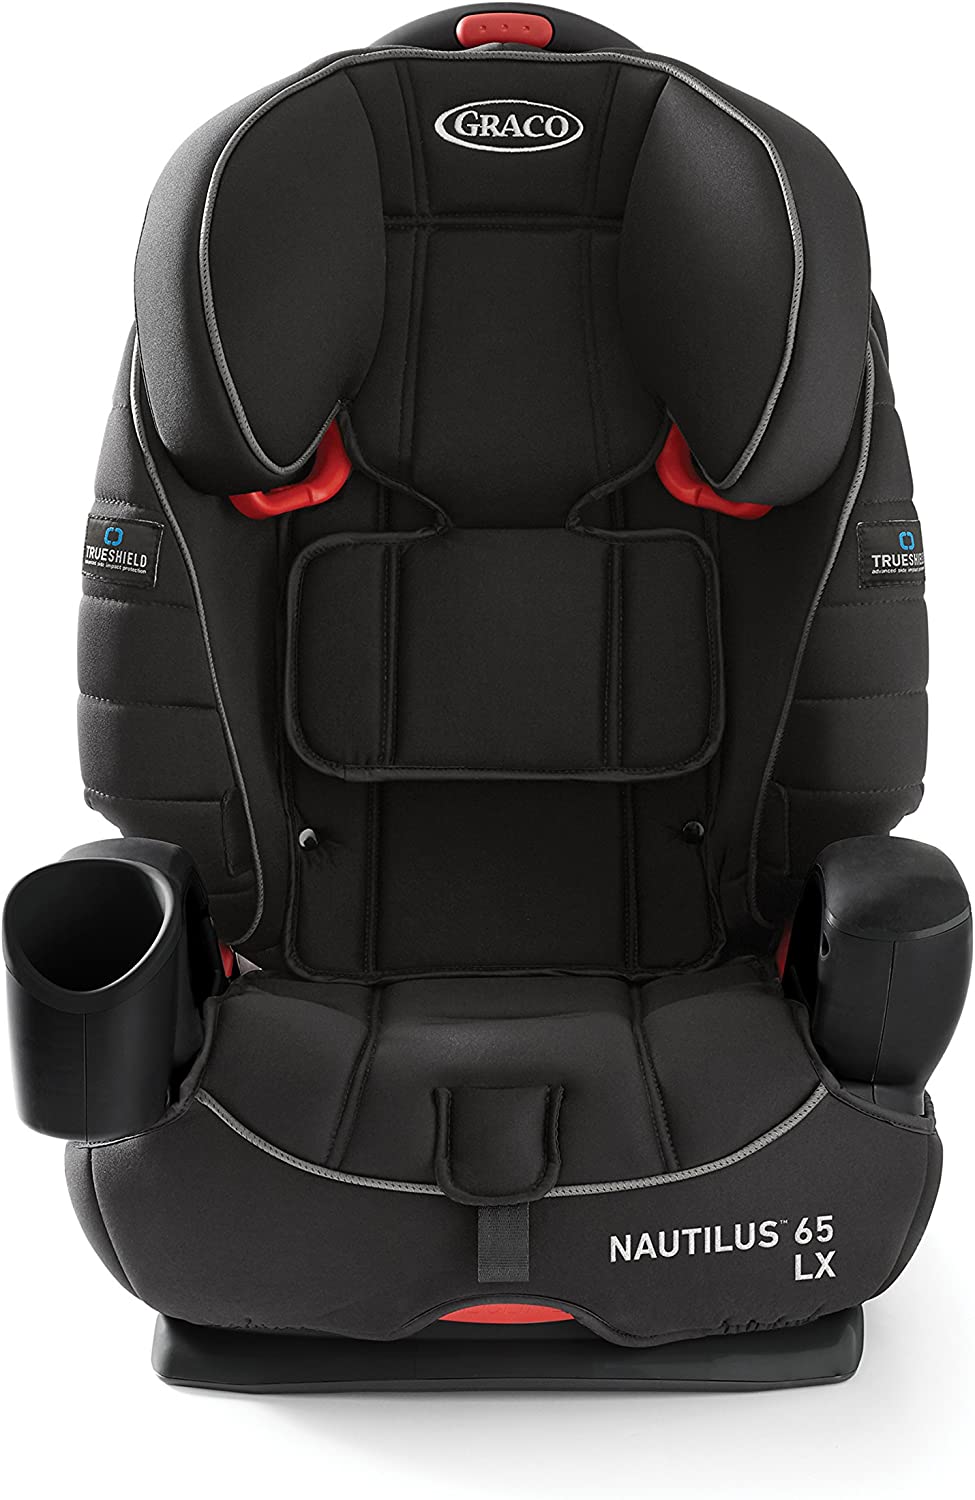 Graco Nautilus 65 LX 3-in-1 Harness Booster Featuring TrueShield Technology 